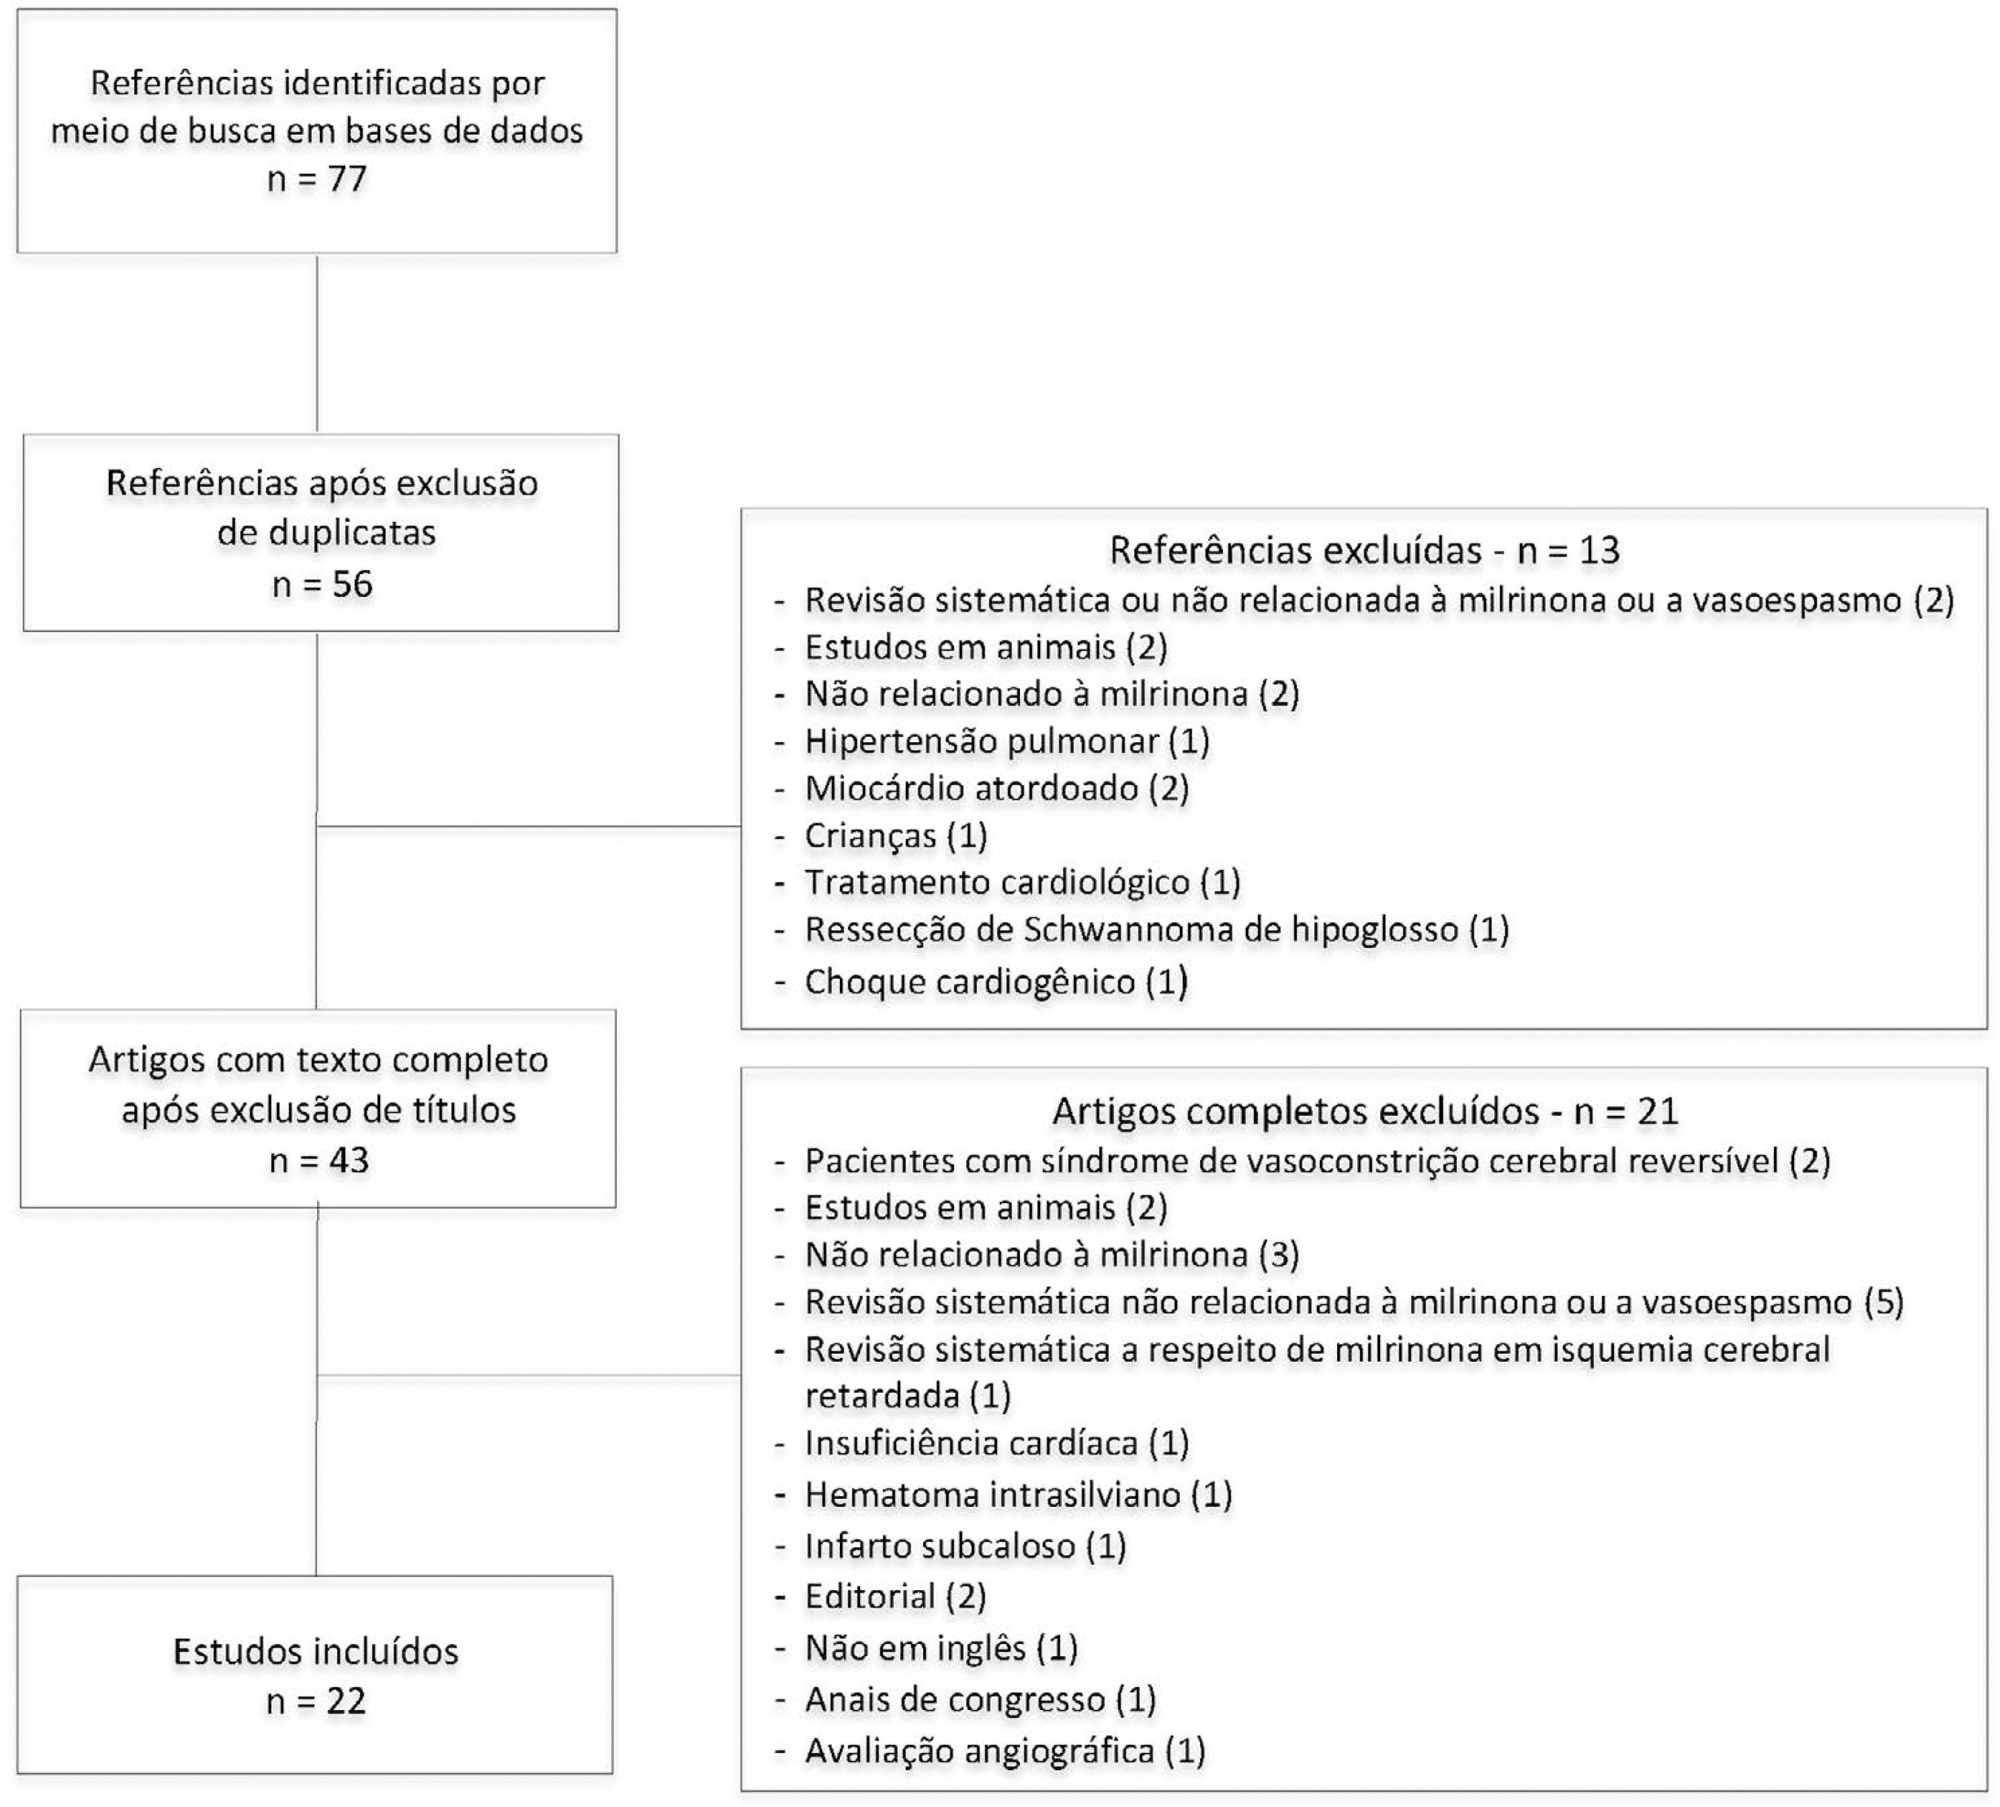 Efficacy and safety of milrinone in the treatment of cerebral vasospasm after subarachnoid hemorrhage: a systematic review